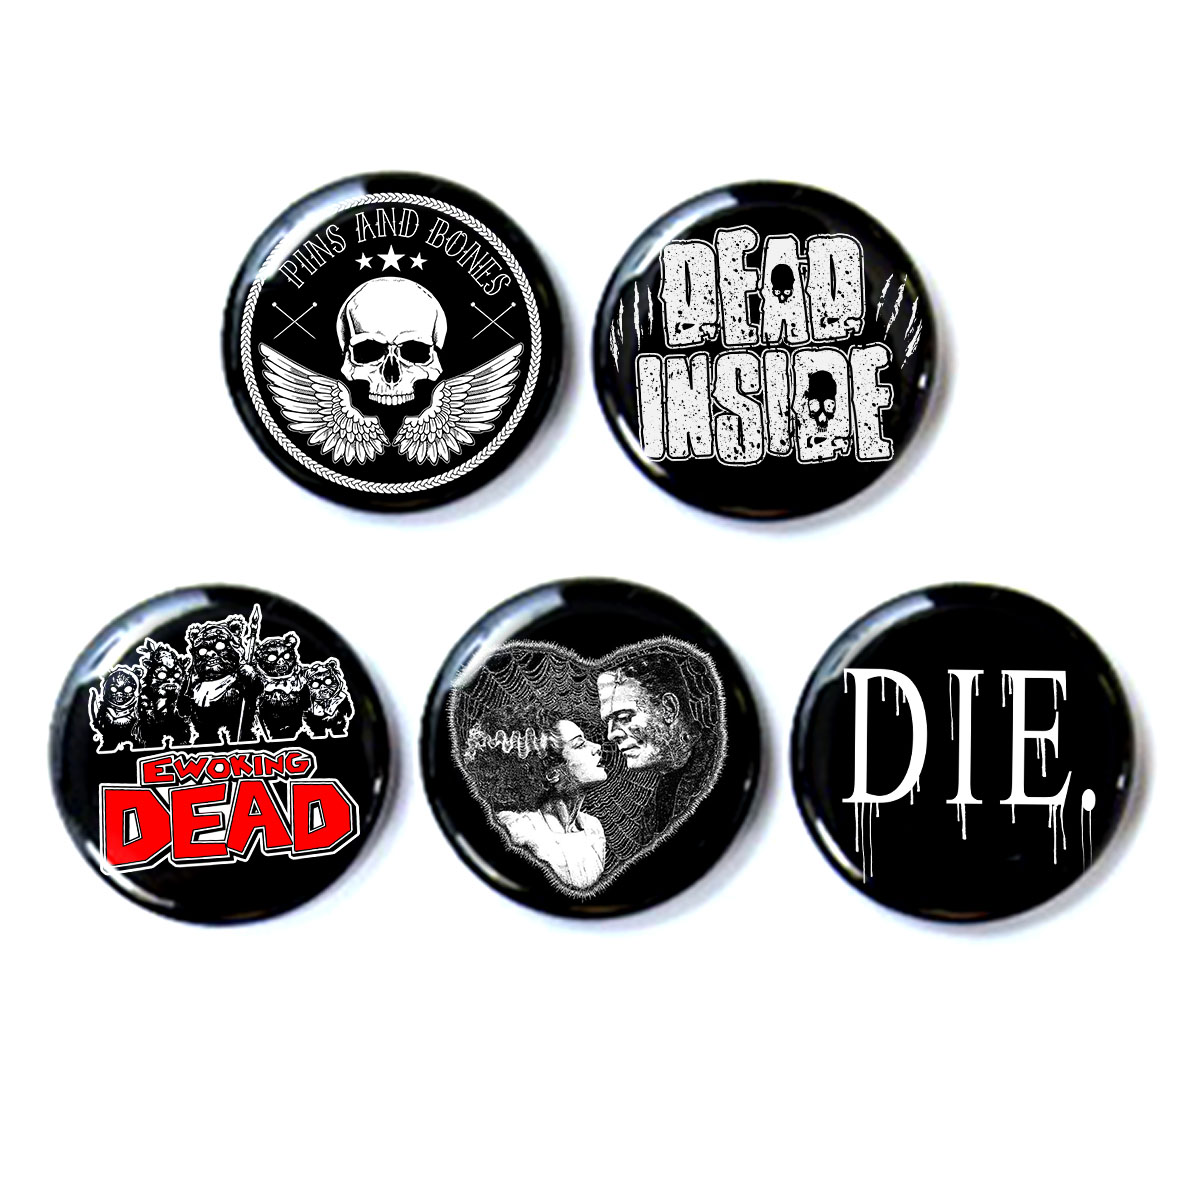 Pins & Bones 5-Pack, Black 1-Inch Pin Back Buttons, Horror Collection 1